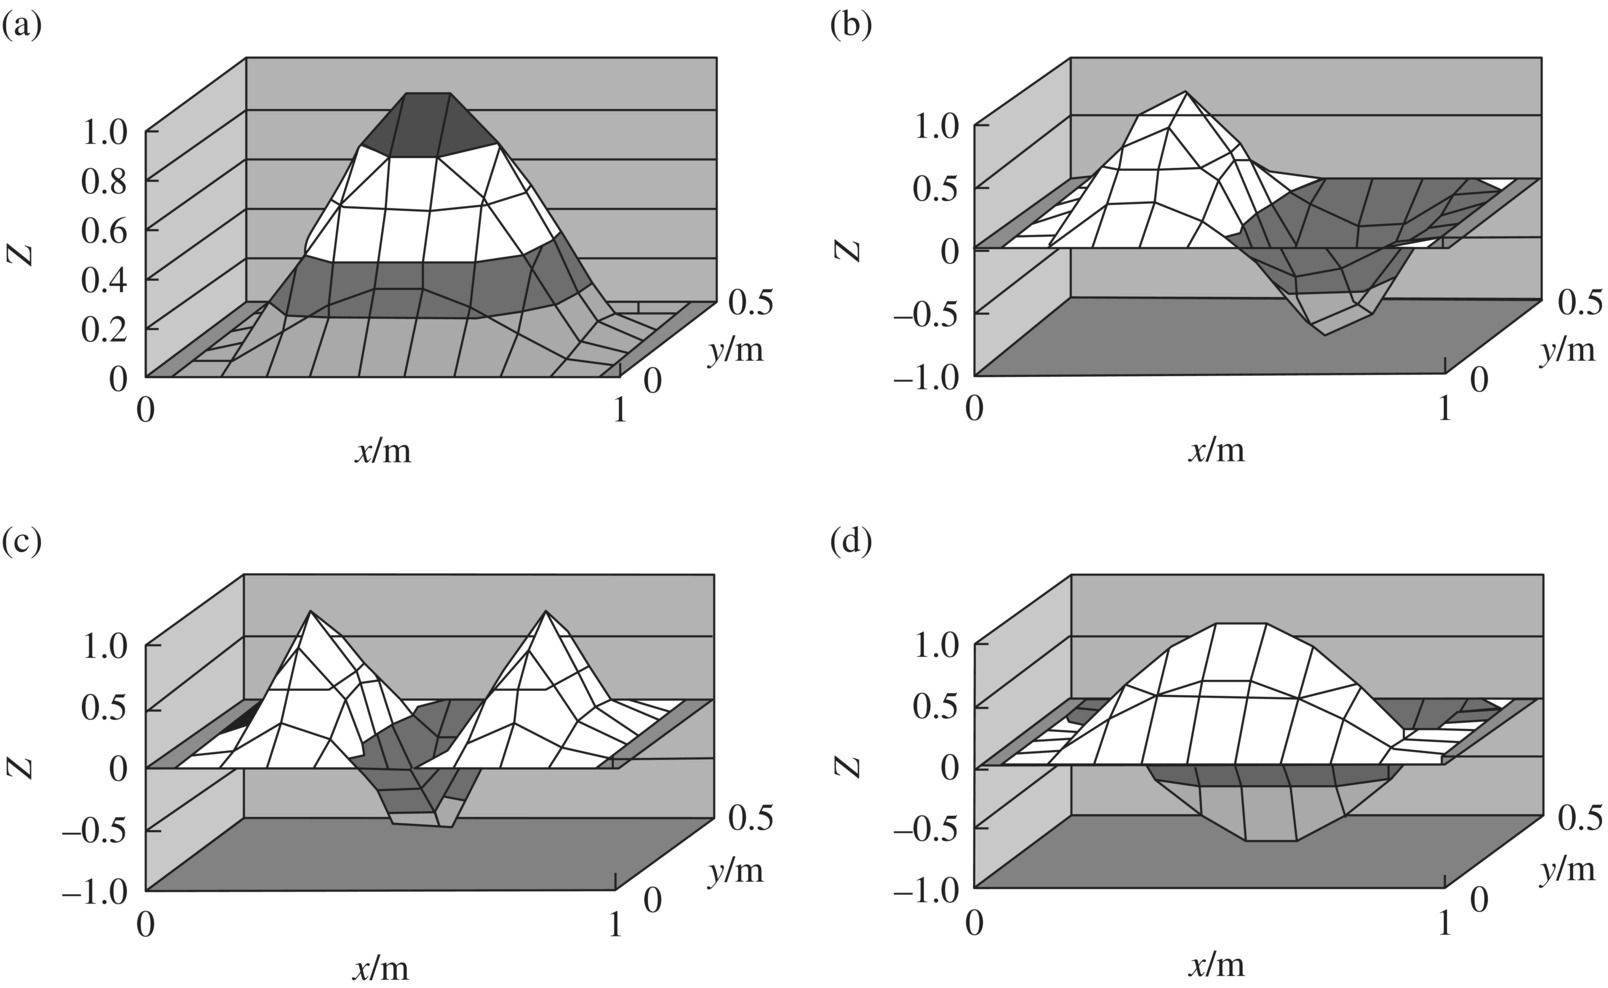 4 Surface graphs of computational results of mode shape corresponding to different frequencies illustrating ω1,1 = 174 65 rad/s; ω2,1 = 303 32 rad/s; ω2,1 = 303 32 rad/s; and ω1,2 = 519 75 rad/s.